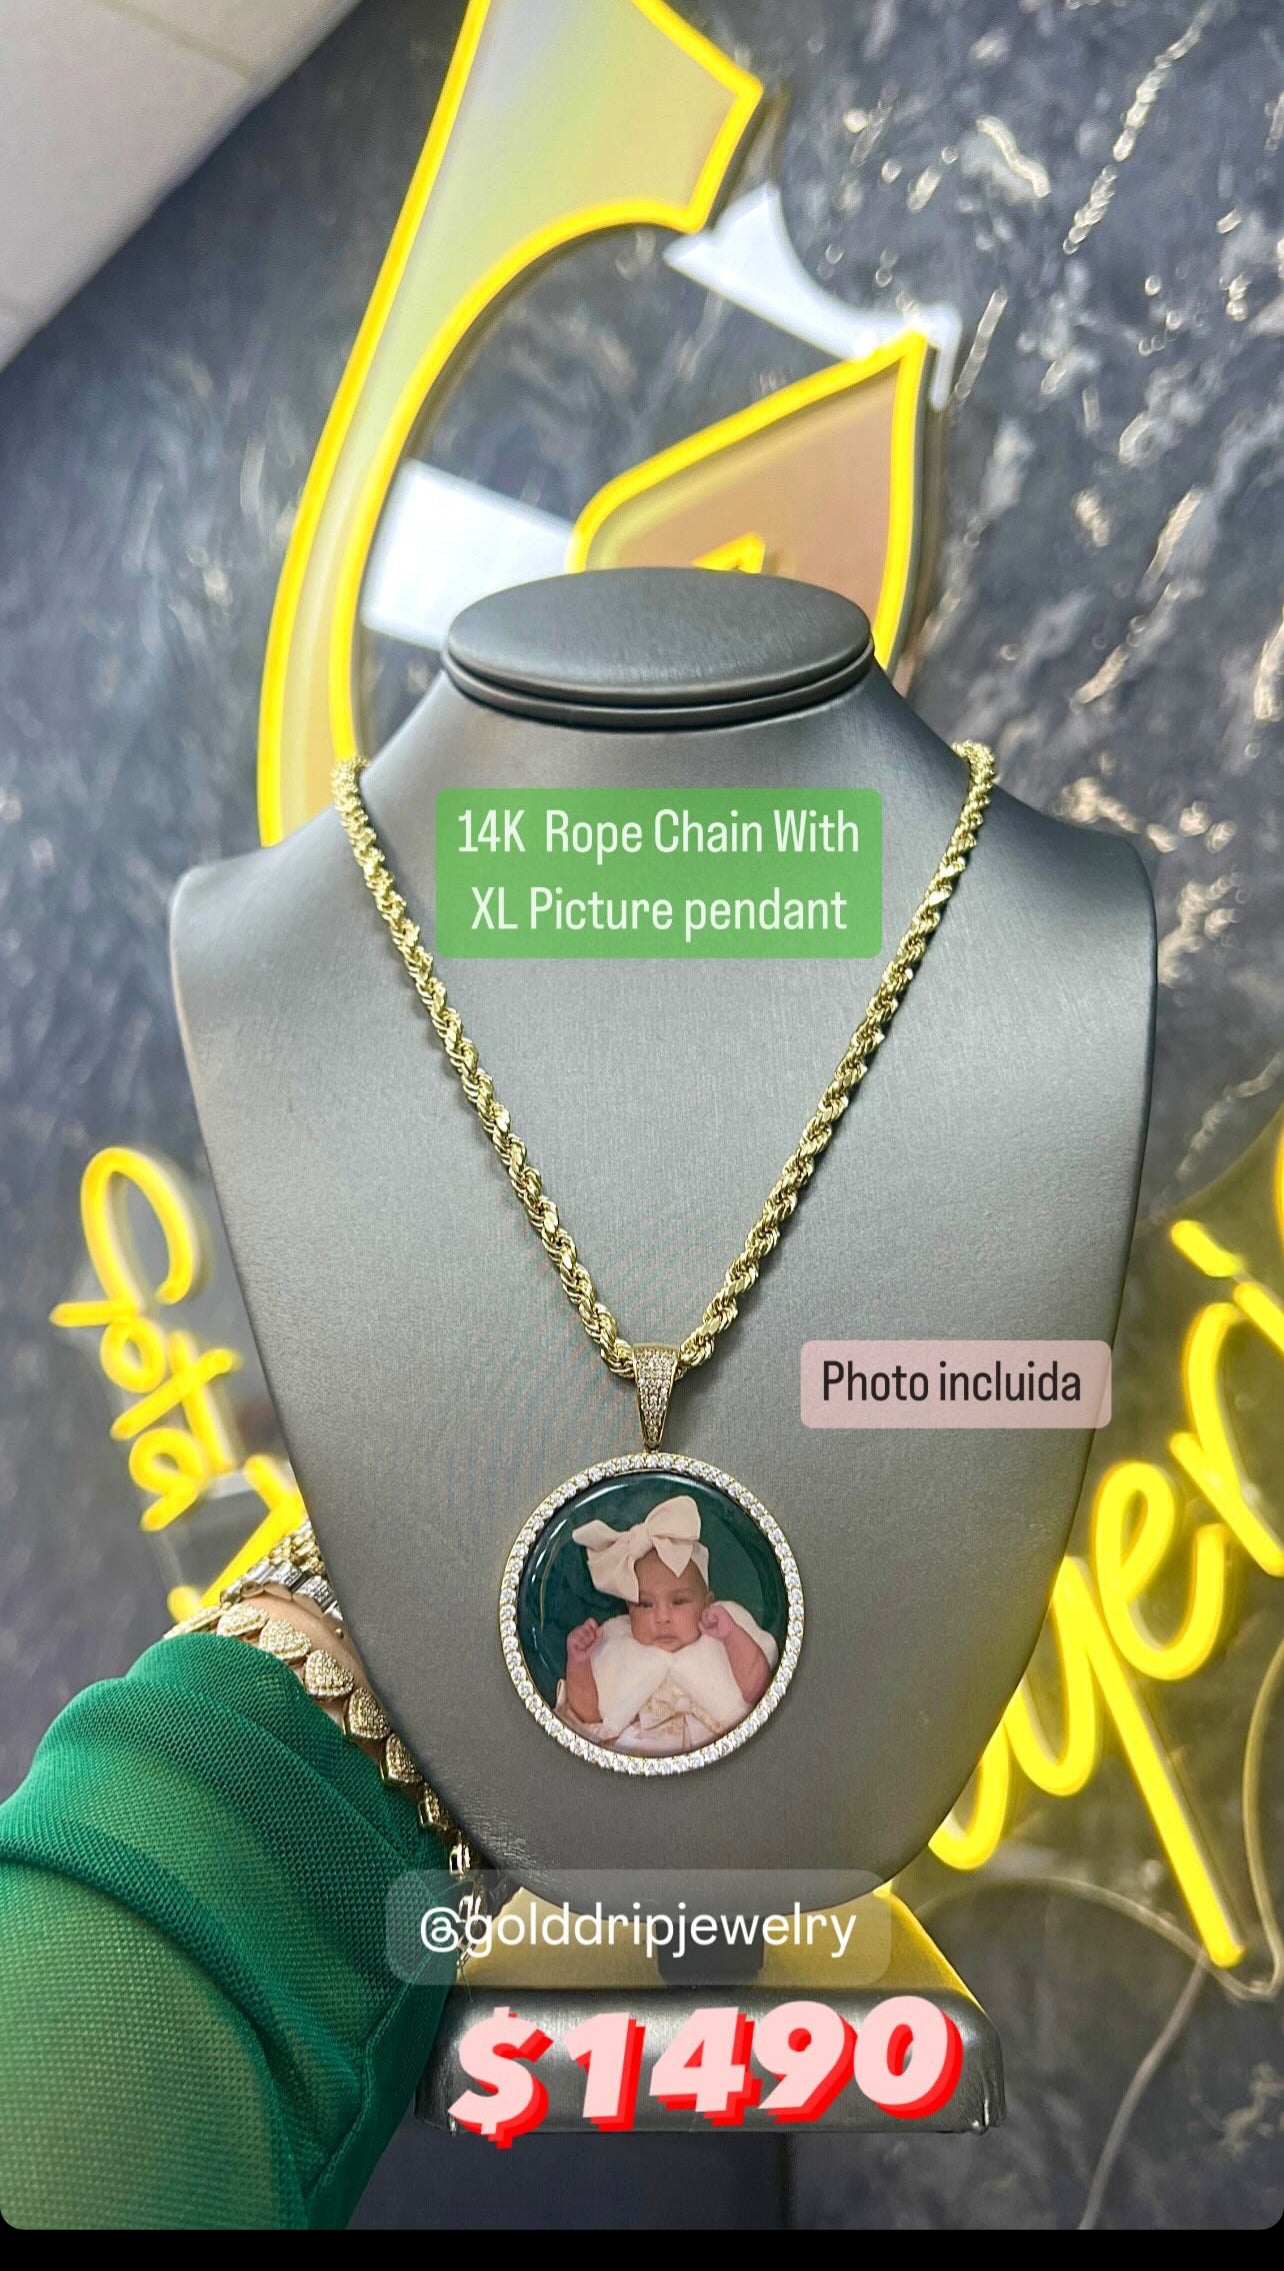 14K Rope Chain With XL Picture Pendant By GDO